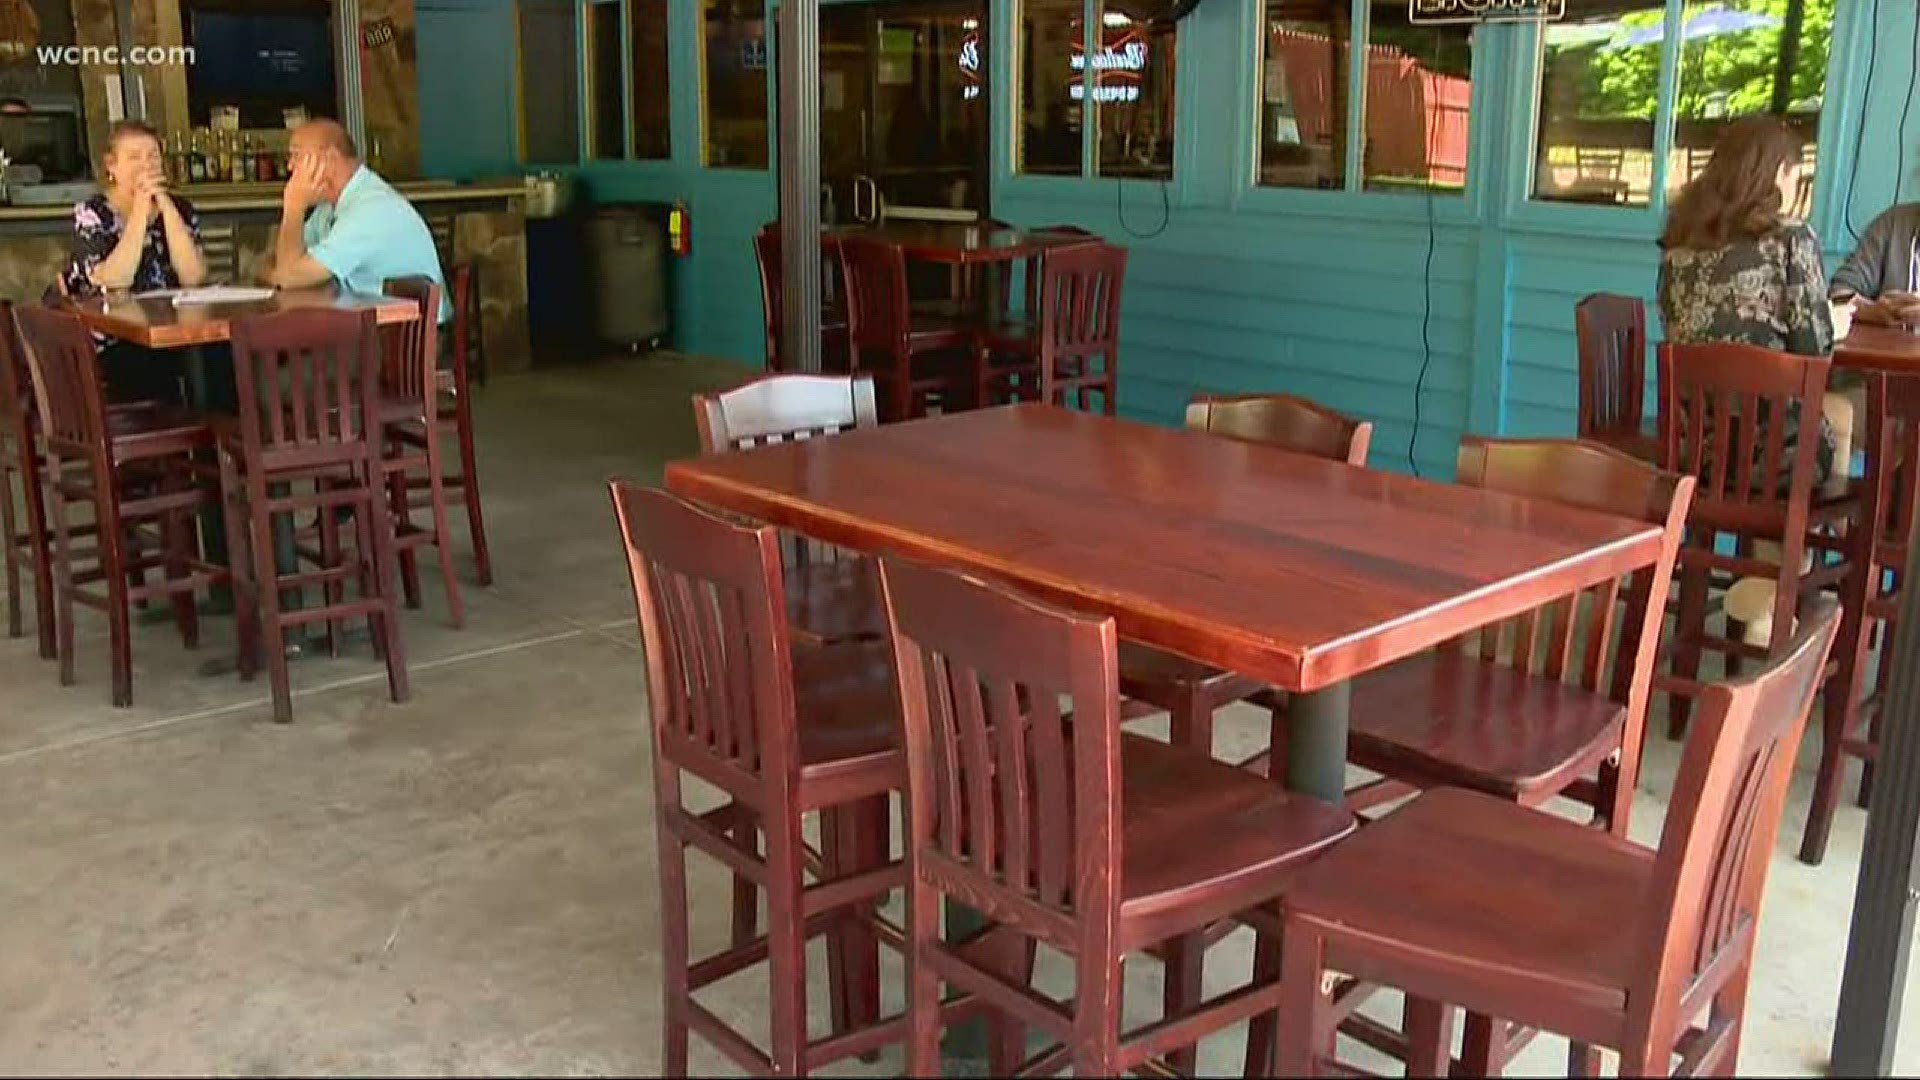 As the door cracks open on dine-in service in the Carolinas, some restaurants are eager to get going again.